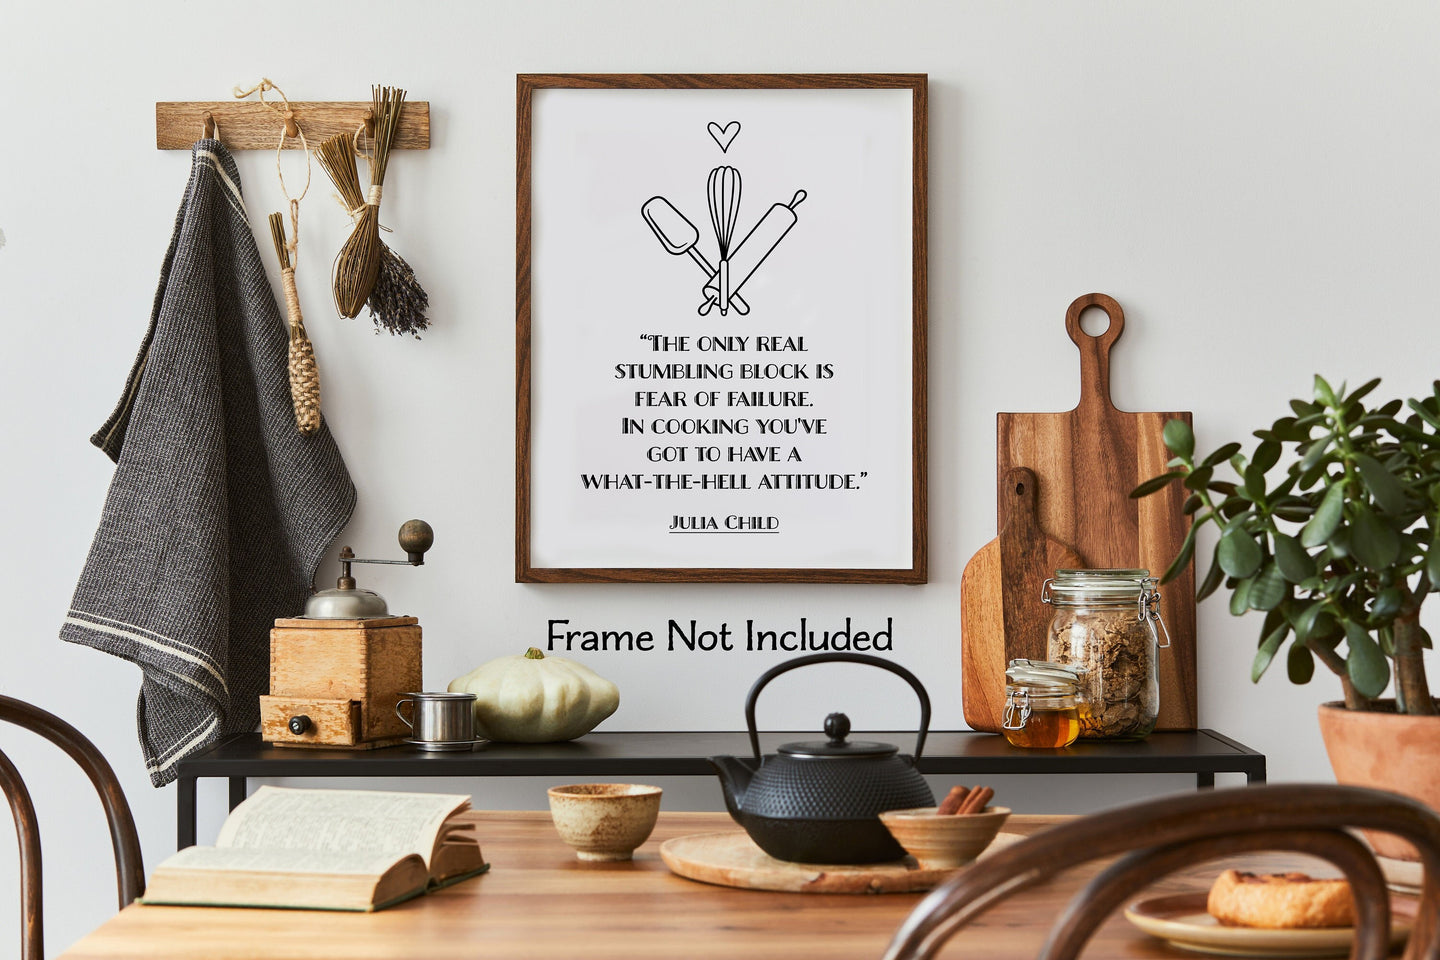 Julia Child Quote -The only real stumbling block is fear of failure - Kitchen Wall Art Food Lover Art - Physical Print Without Frame